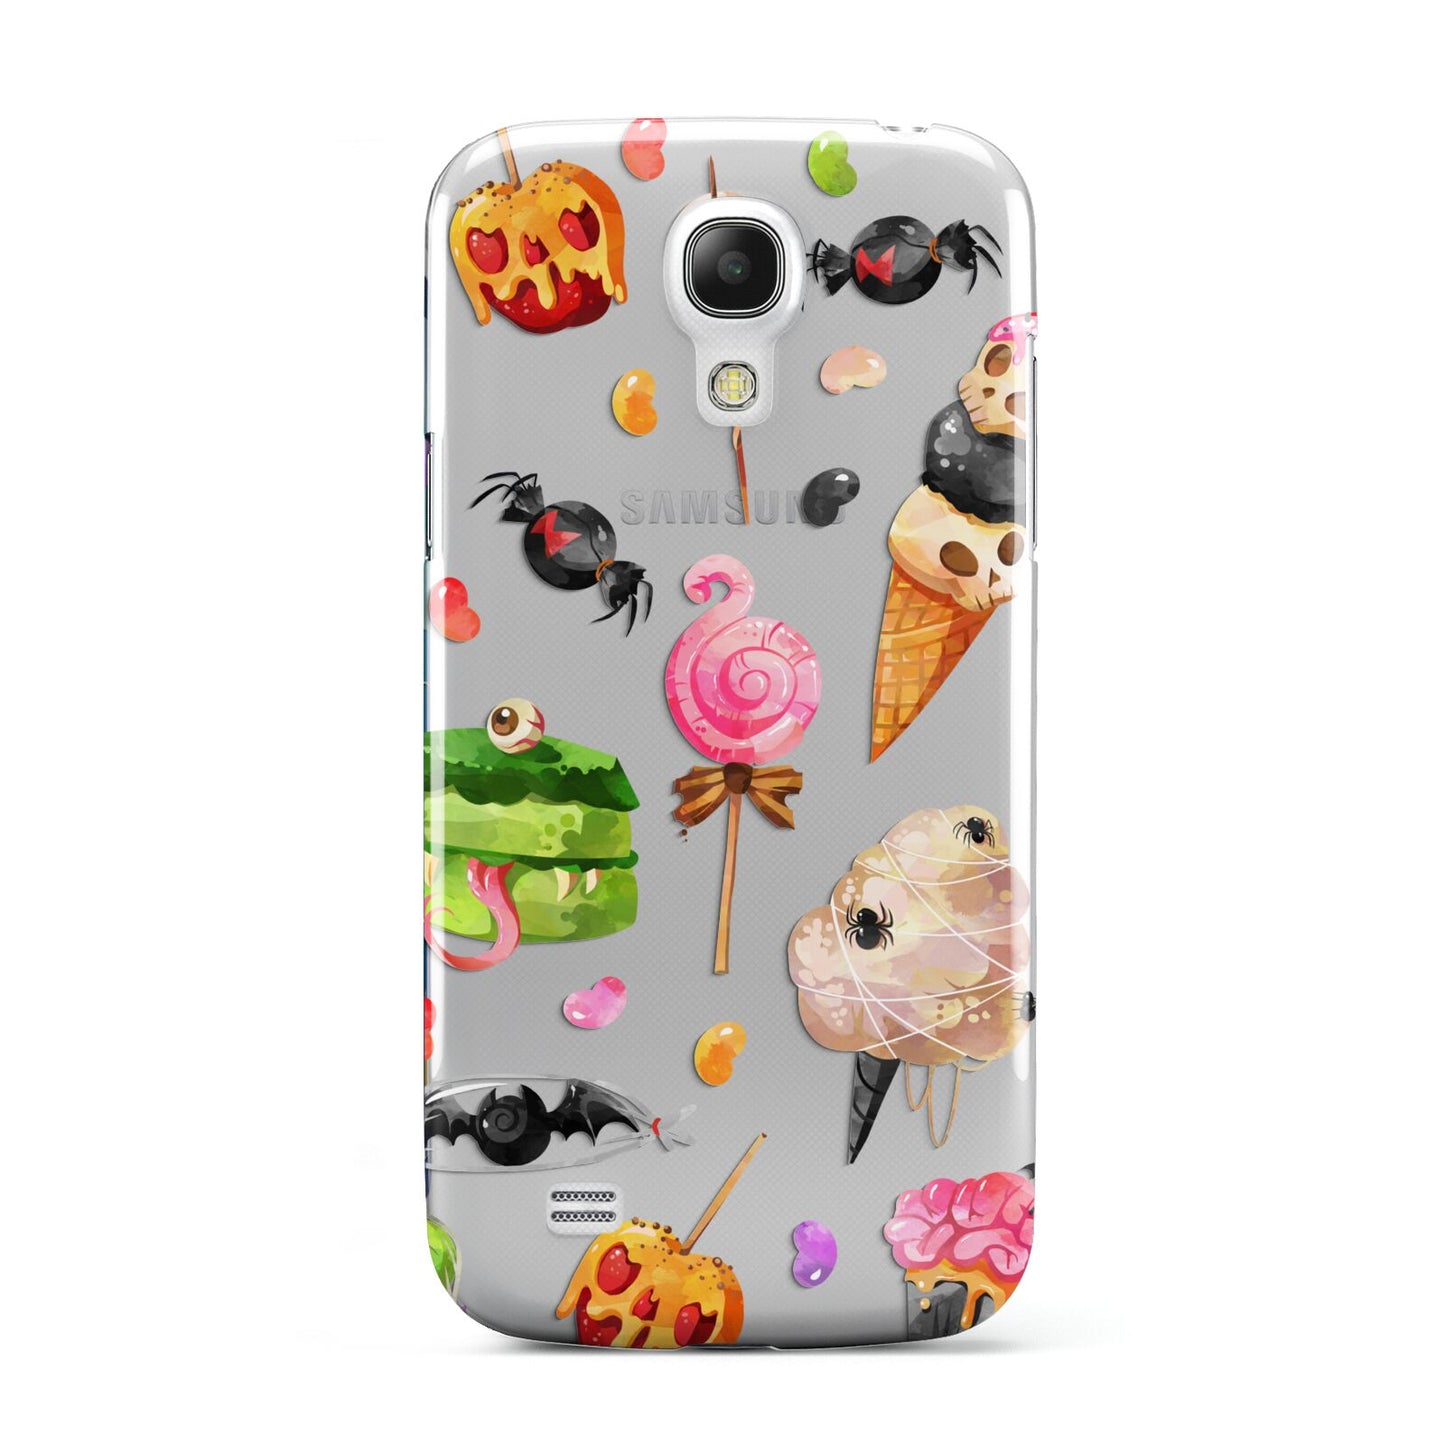 Halloween Cakes and Candy Samsung Galaxy S4 Mini Case